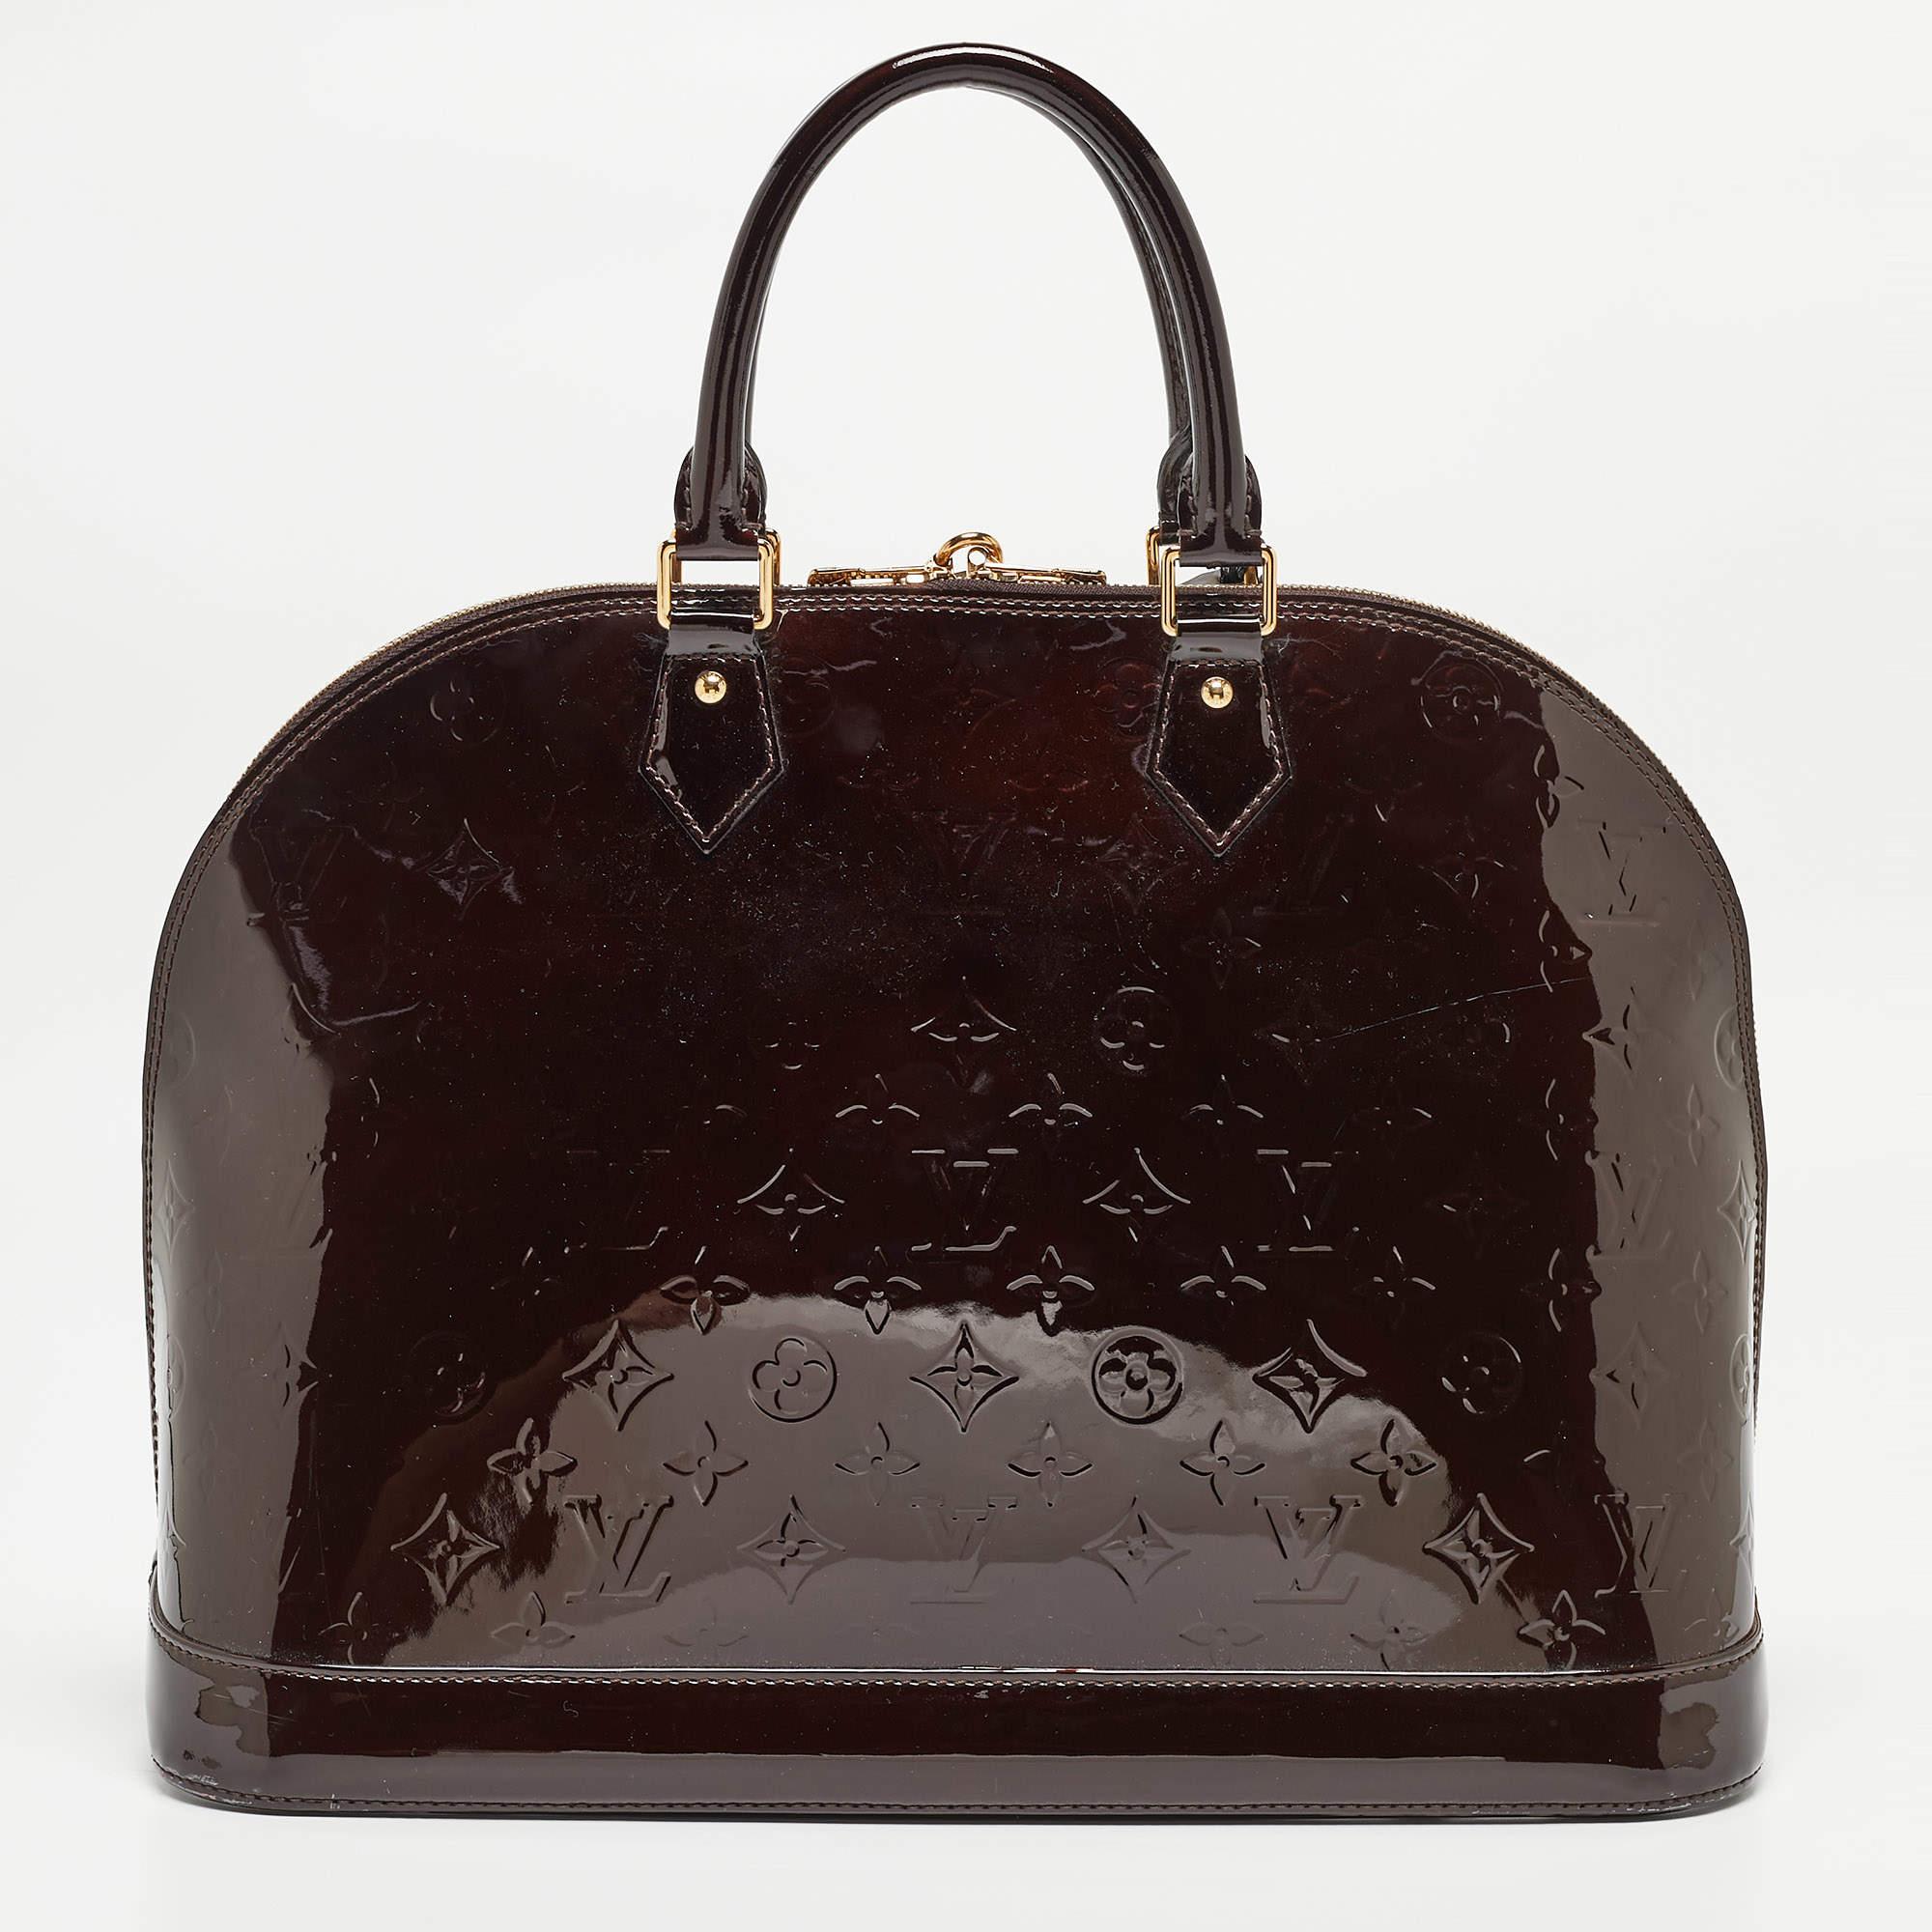 Embrace elegance with the Louis Vuitton Alma GM Bag. Crafted with meticulous attention to detail, its rich amarante color and iconic monogram pattern exude timeless allure. The spacious interior and structured silhouette make it a perfect blend of